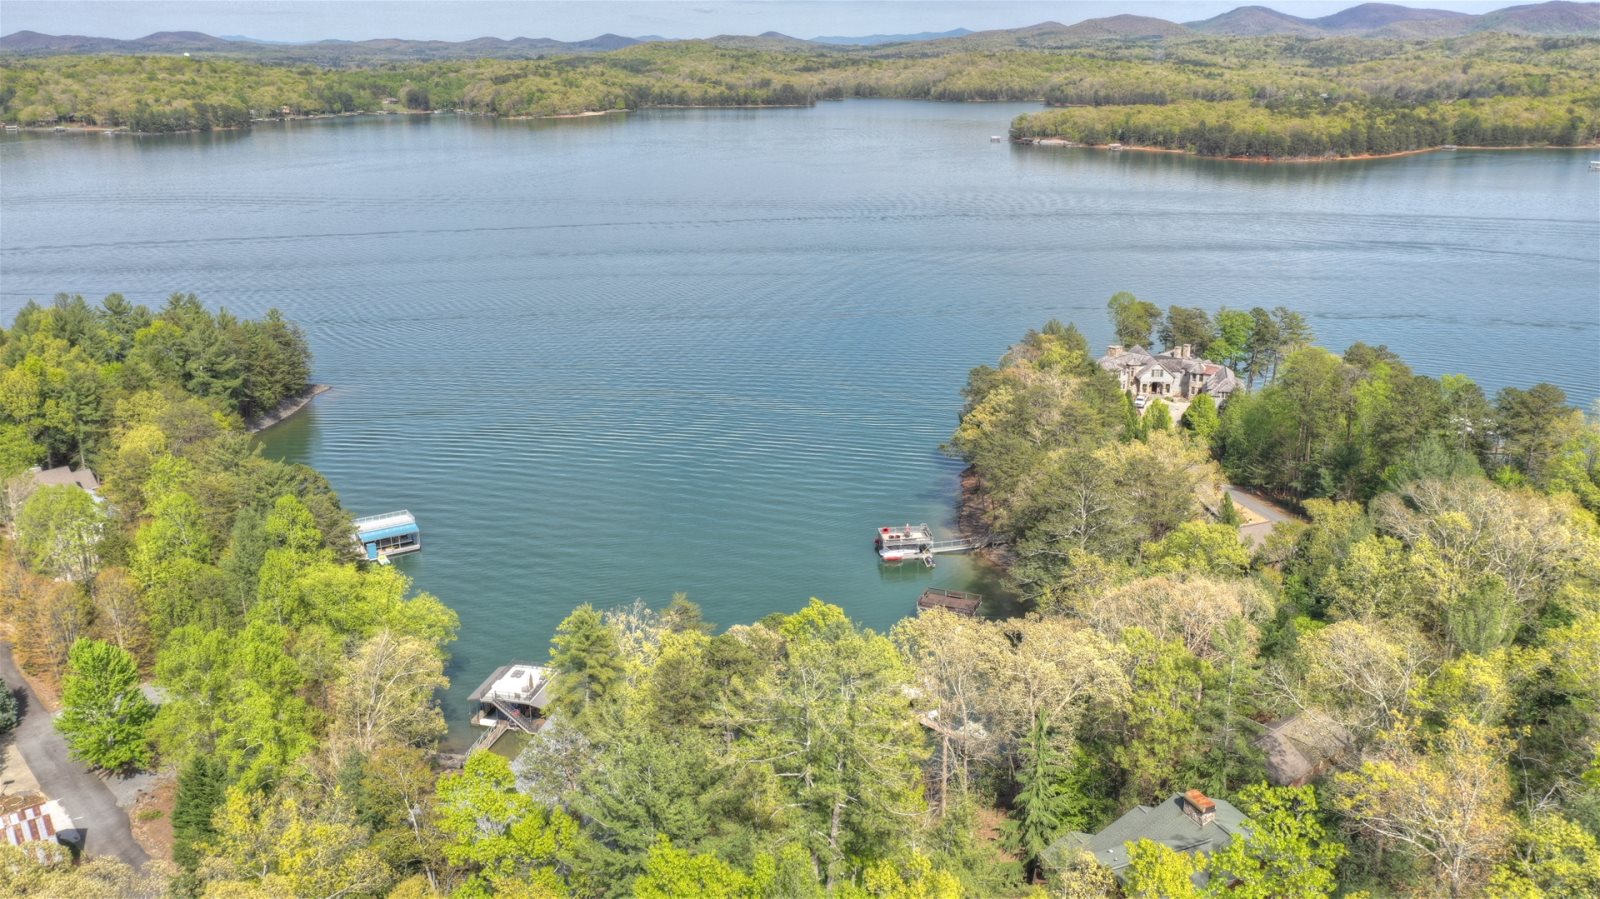 When in Rome - Vacation Rental on Lake Blue Ridge